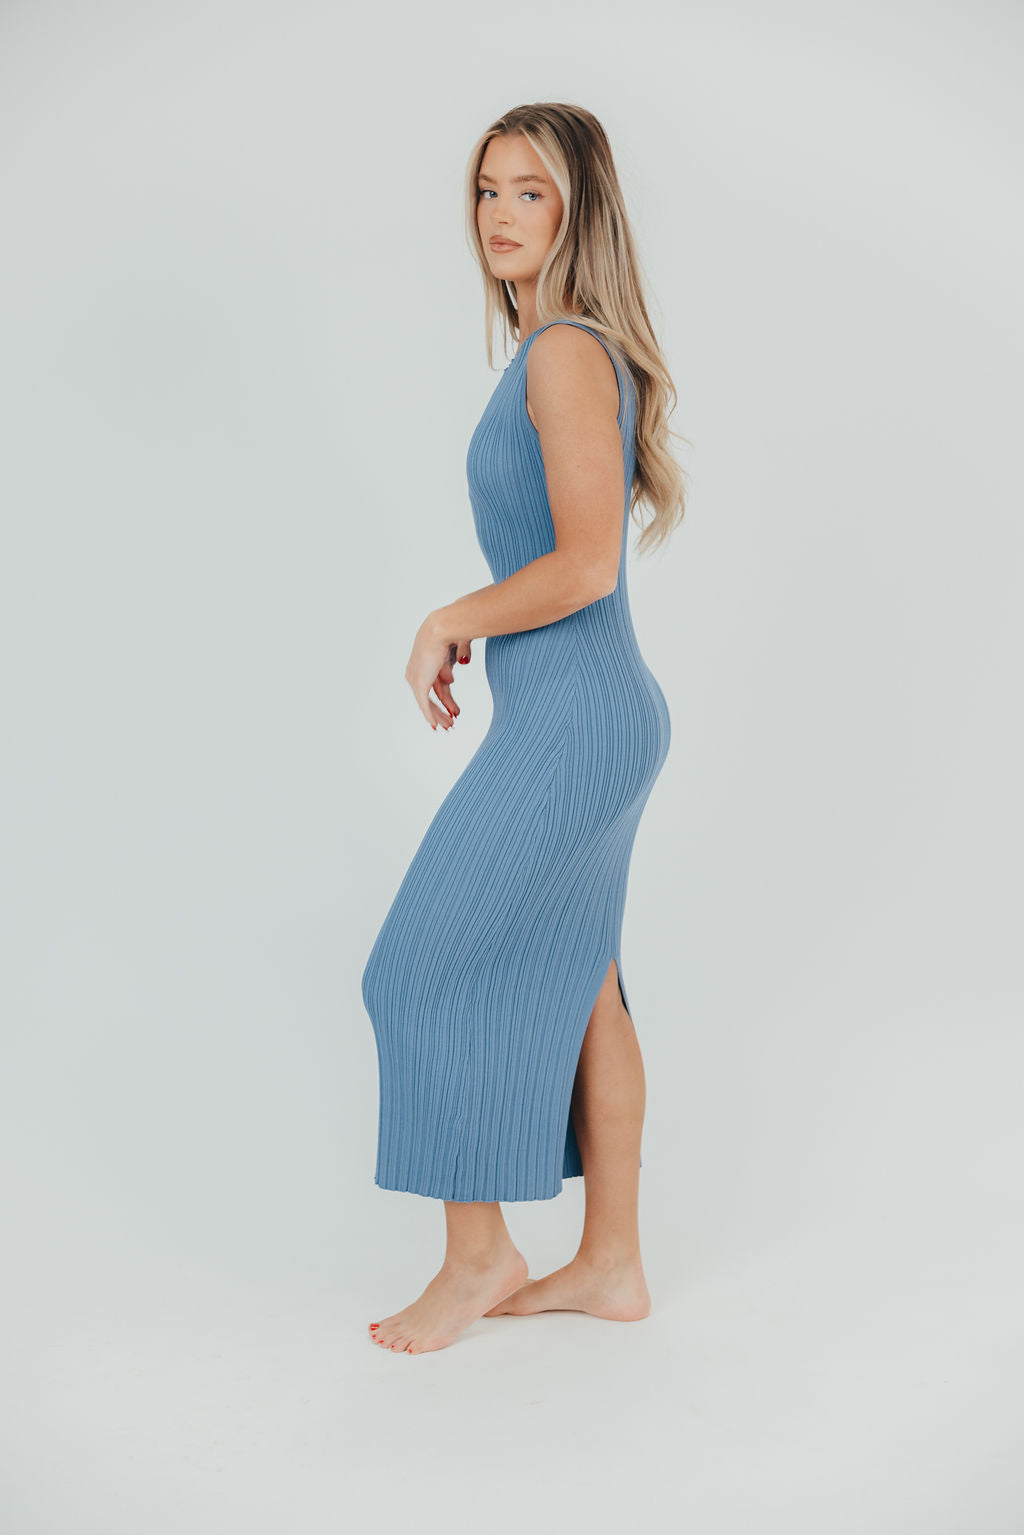 Falling For You Patterned Rib Knit Midi Dress in Blue